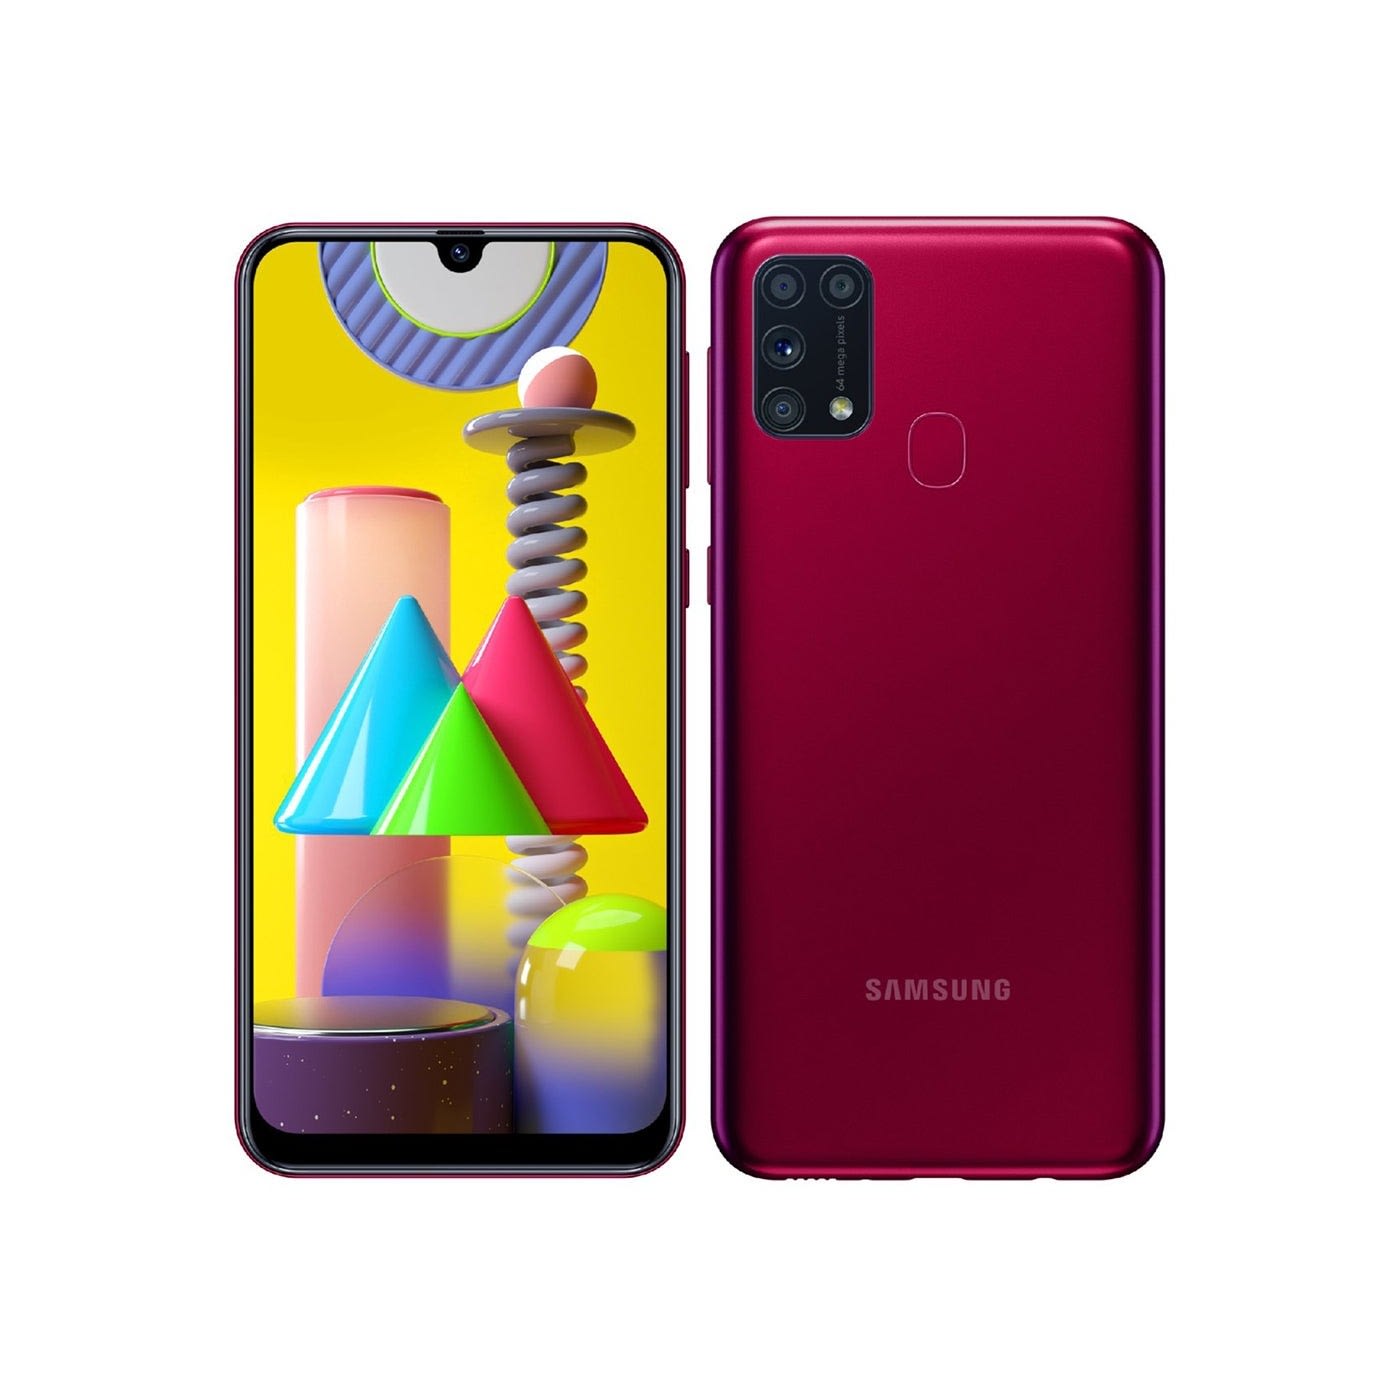 Samsung Galaxy M31 Price Specifications - Mobile Phone Price Online